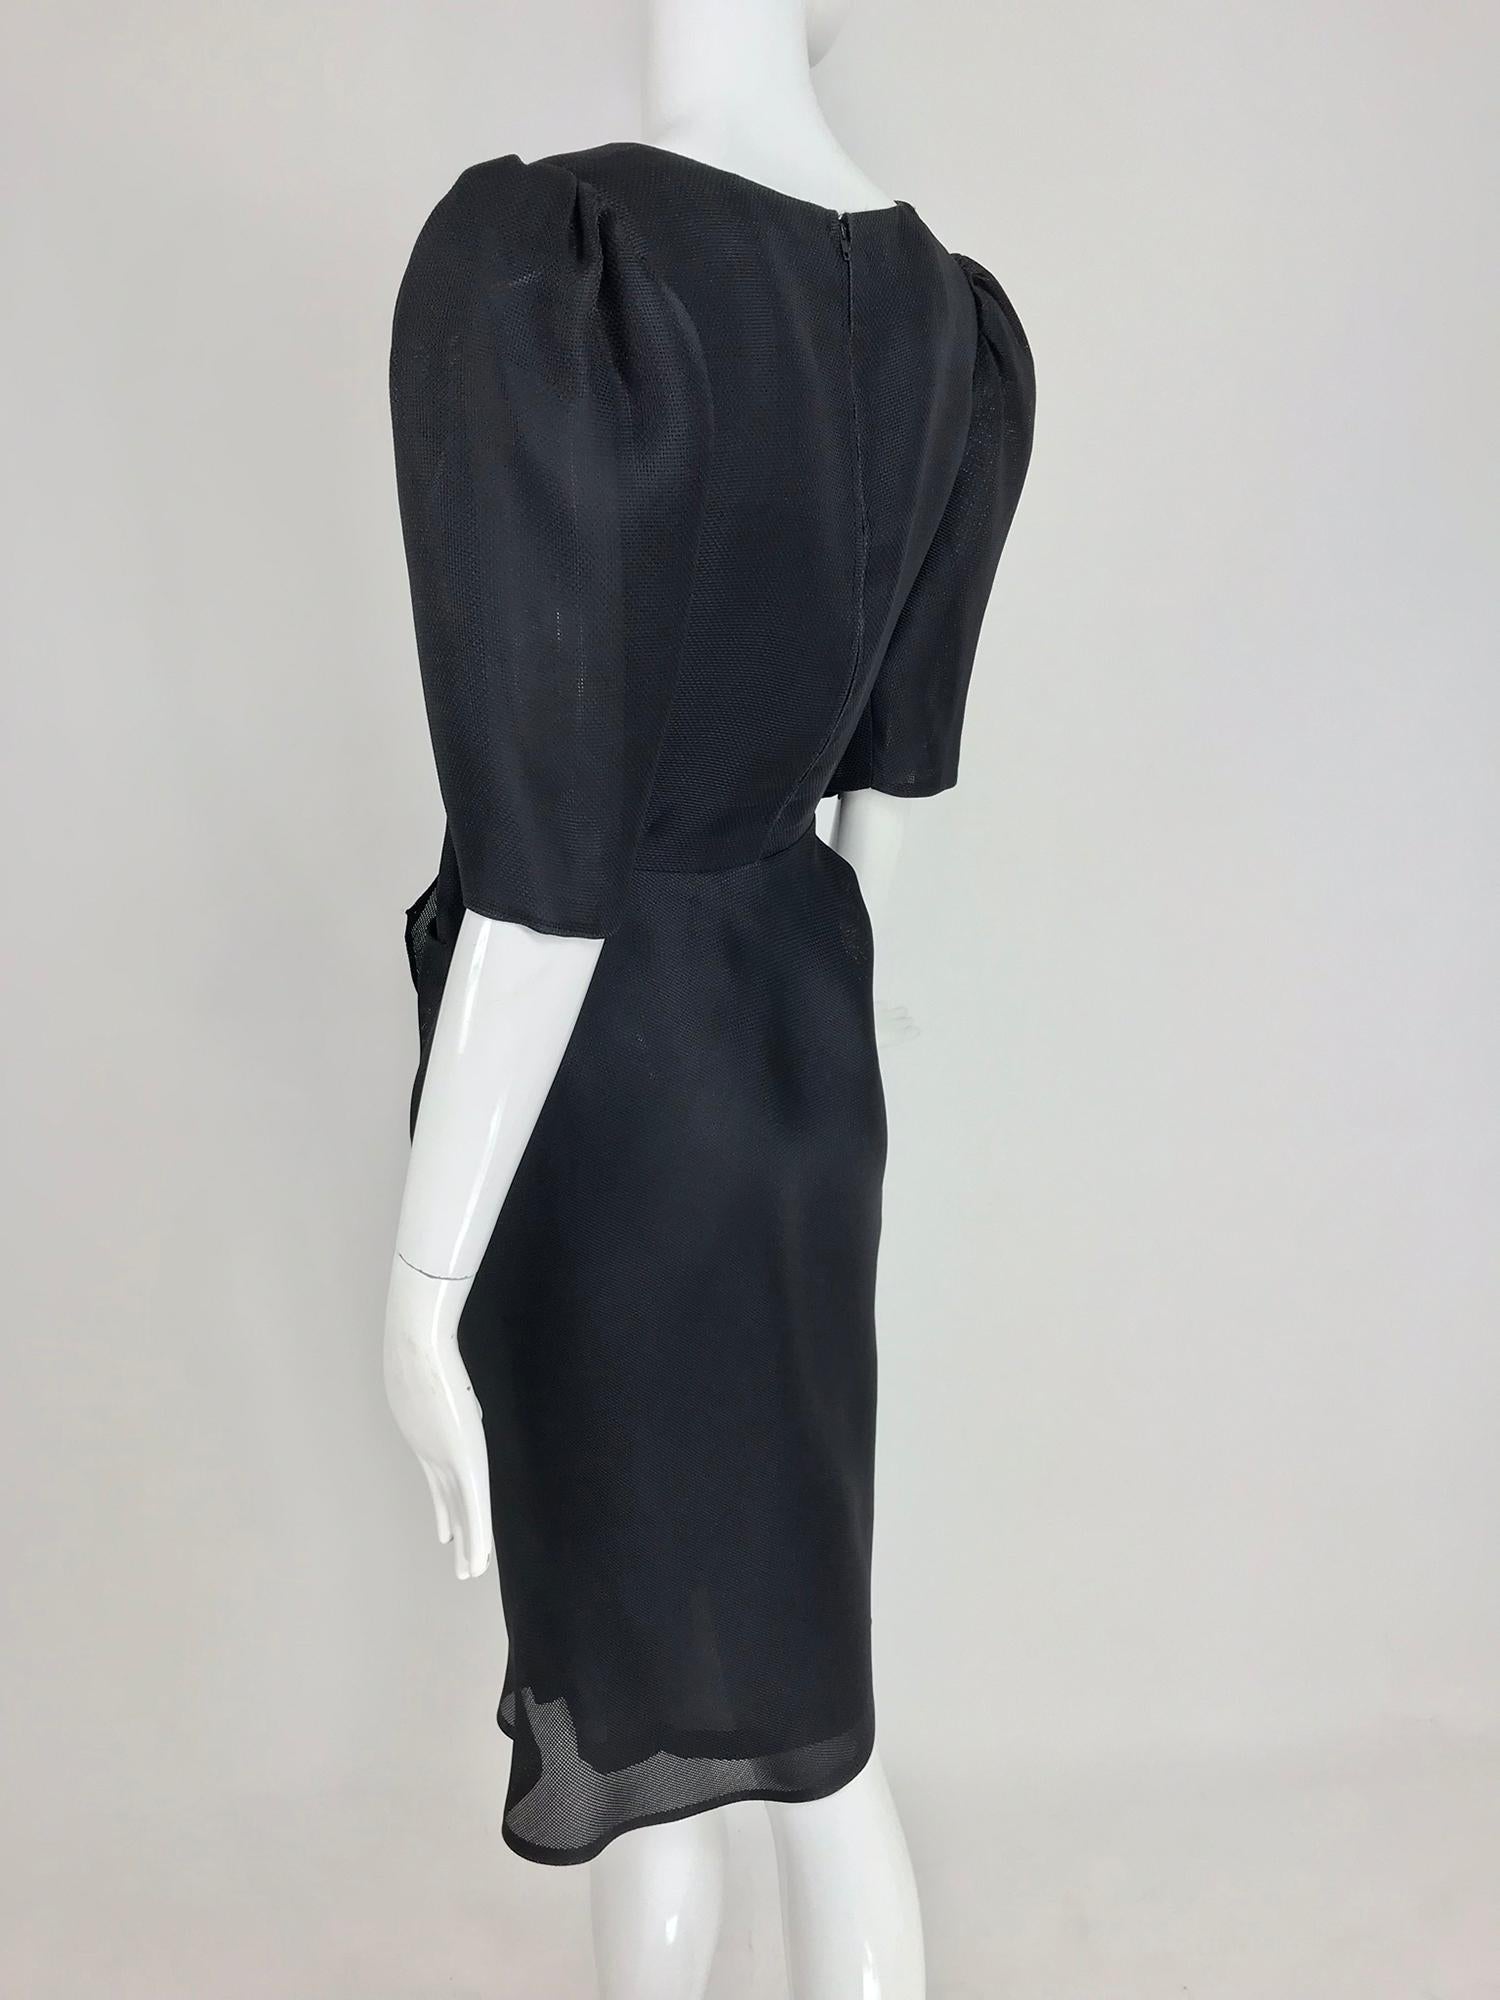 Givency Black Textured Silk Dress with Hip Bow 1990s For Sale 6